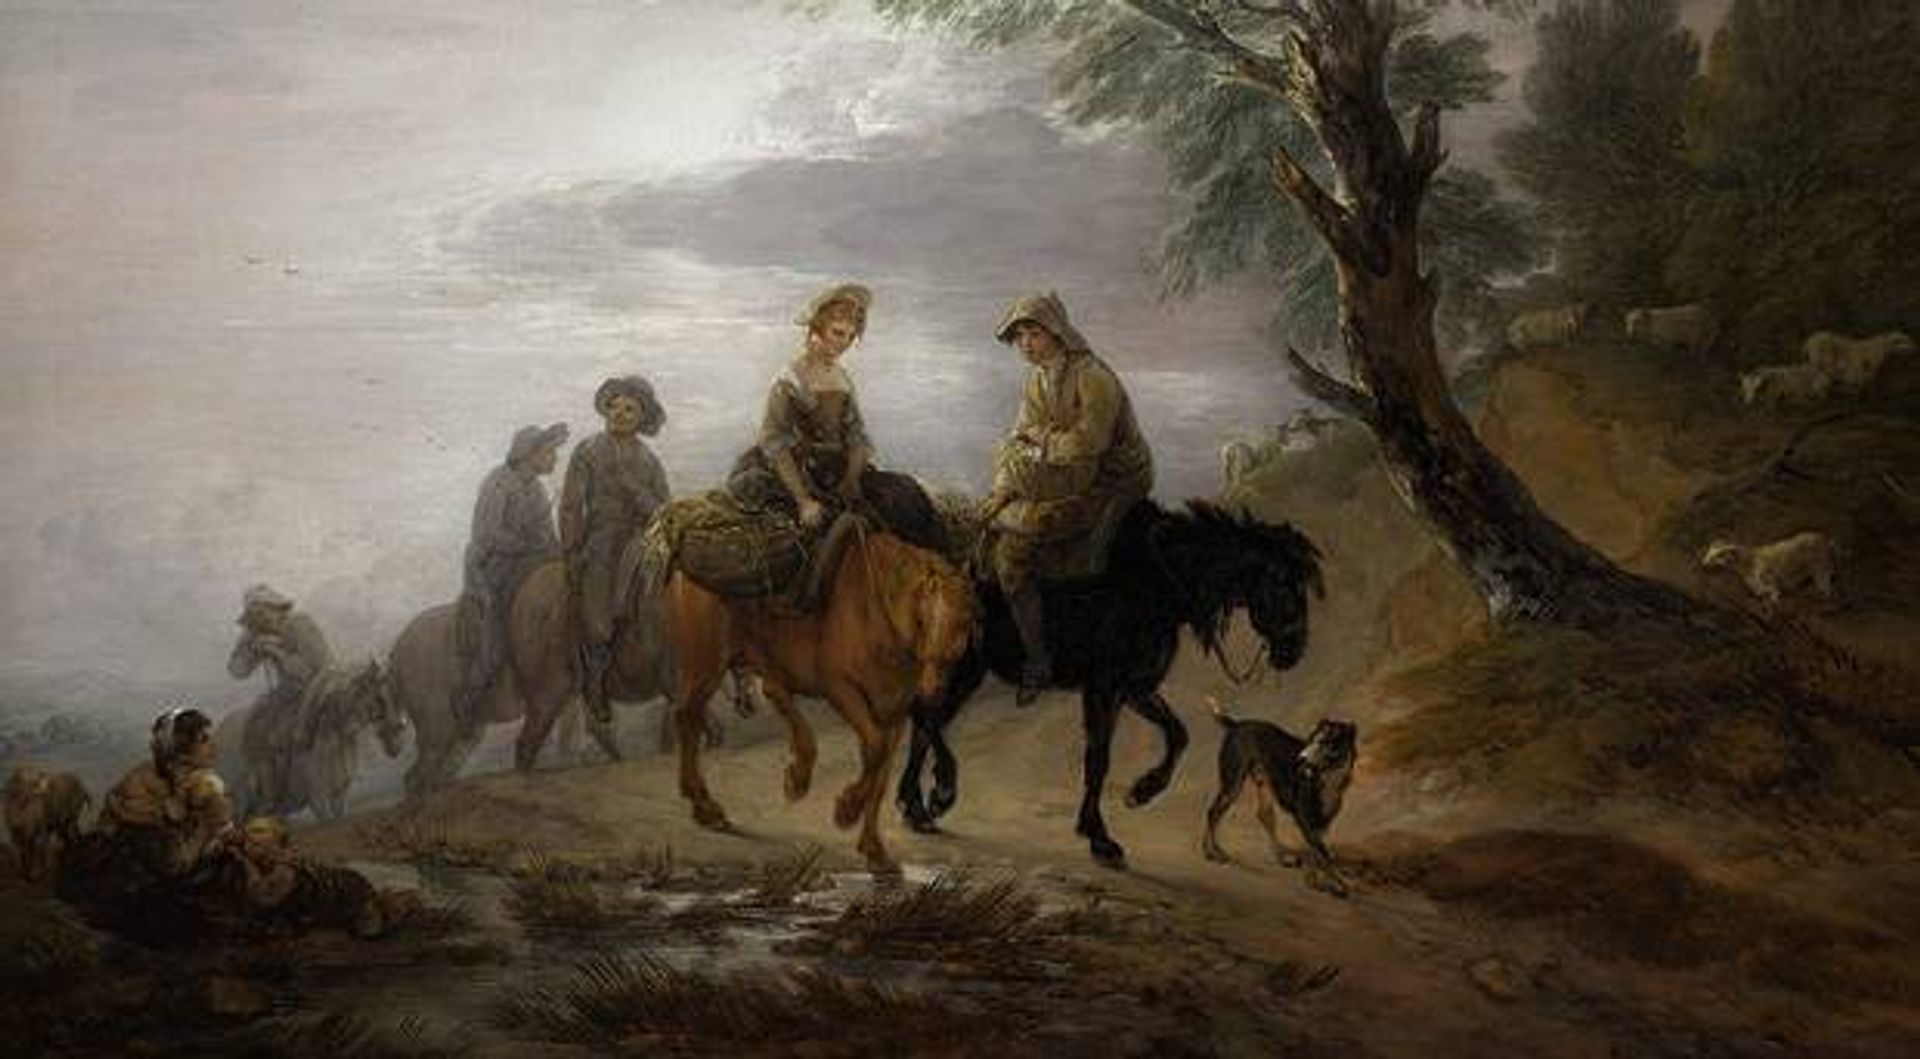 Going to Market, Early Morning (1773), Thomas Gainsborough courtesy DCMS